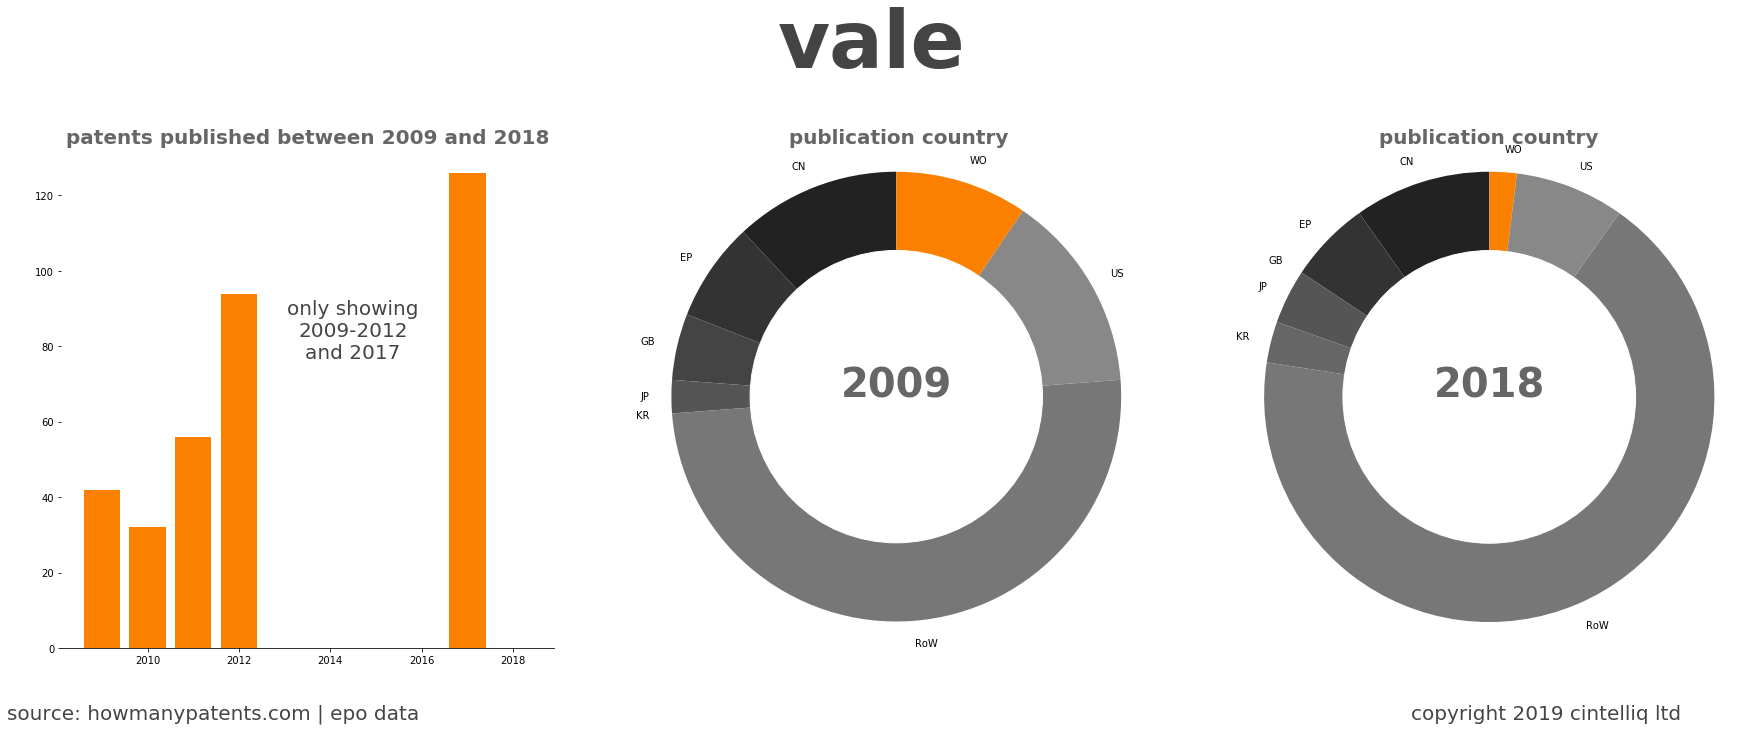 summary of patents for Vale